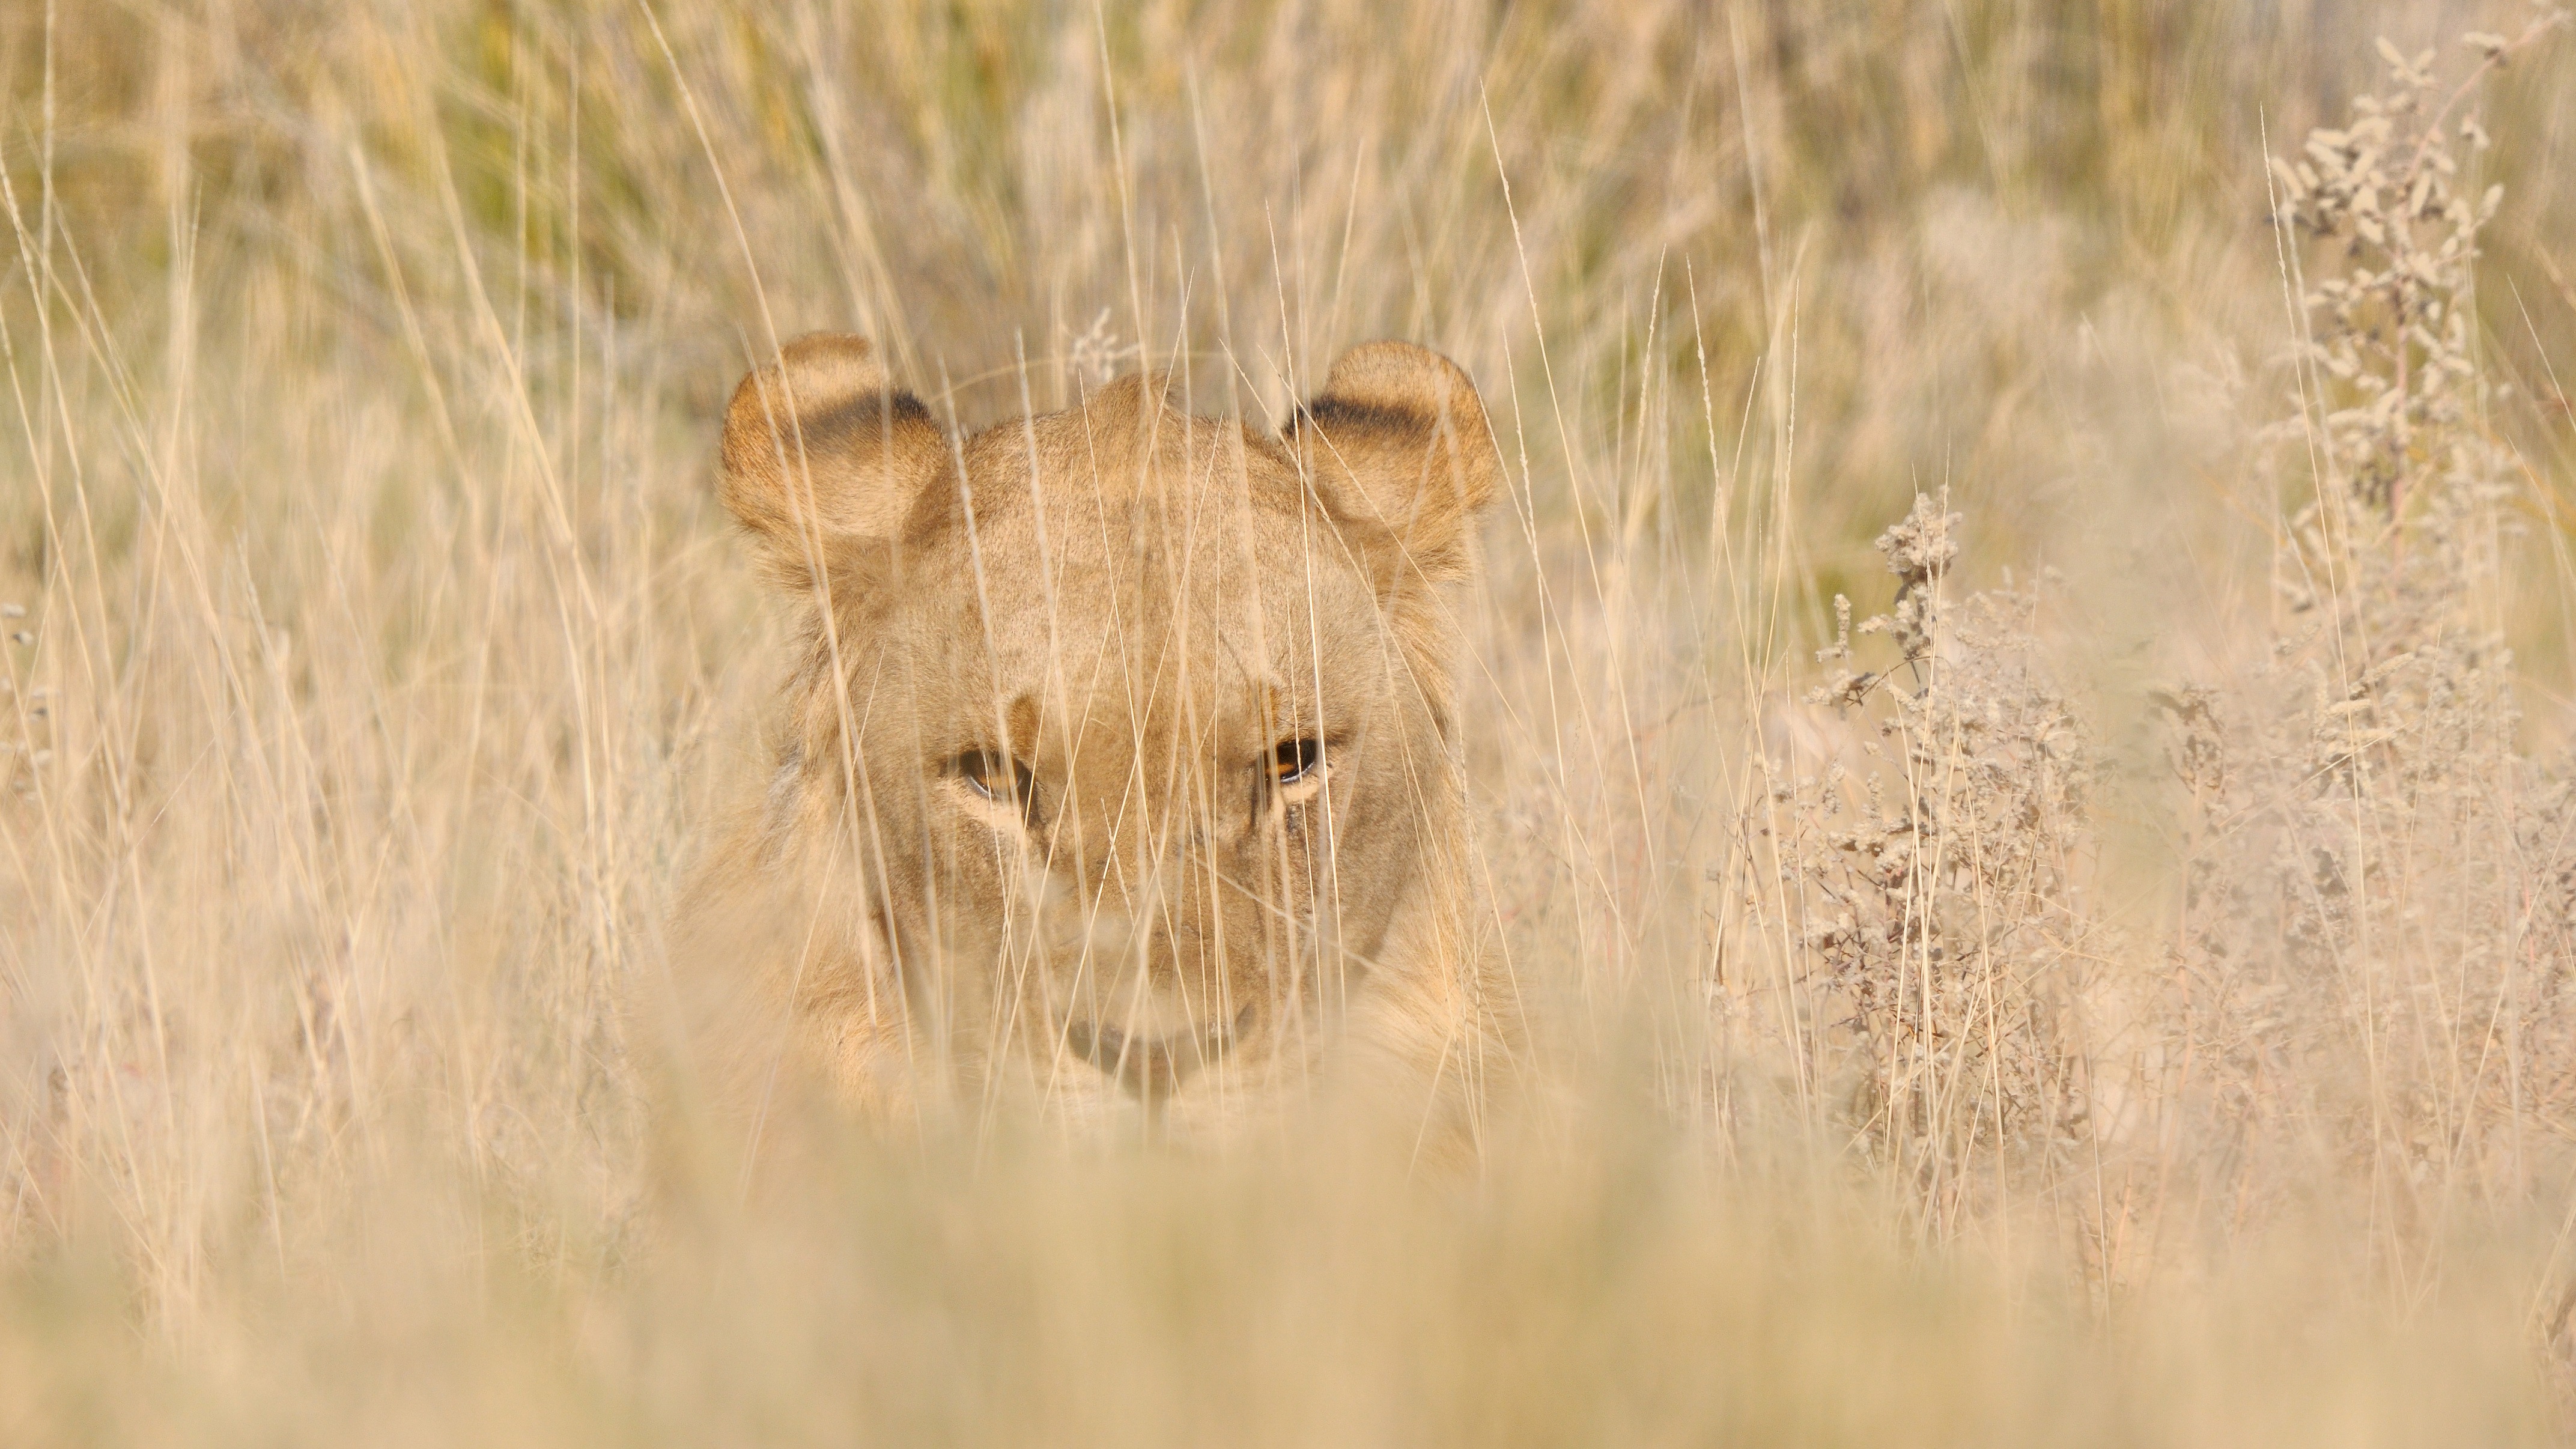 Lion in tall grass